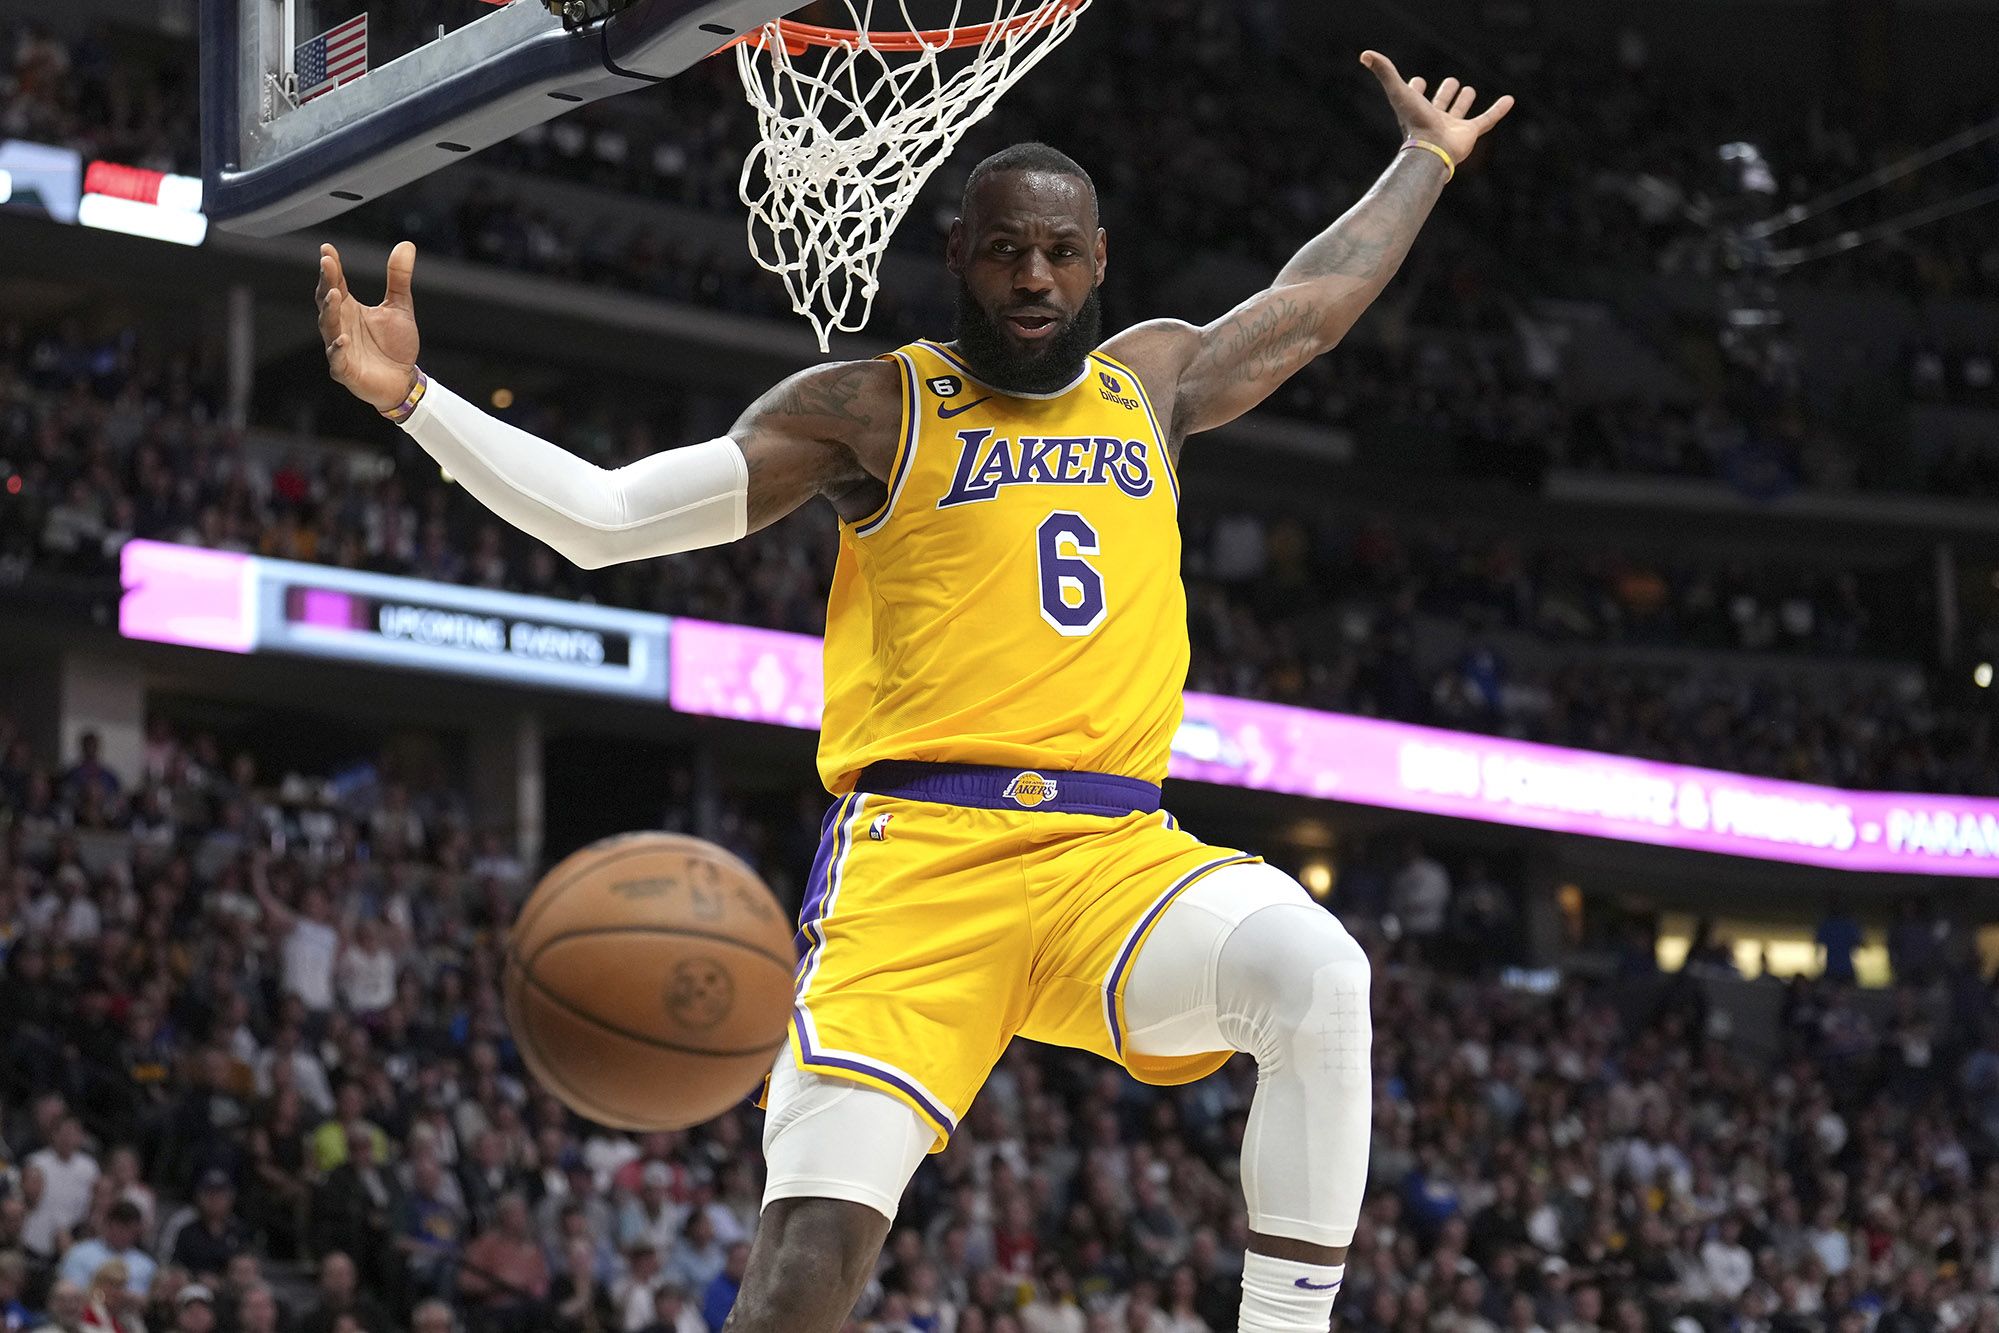 Lakers vs Nuggets Game 2: LeBron James proves he is human after missing an  easy dunk in LA loss to Denver | CNN